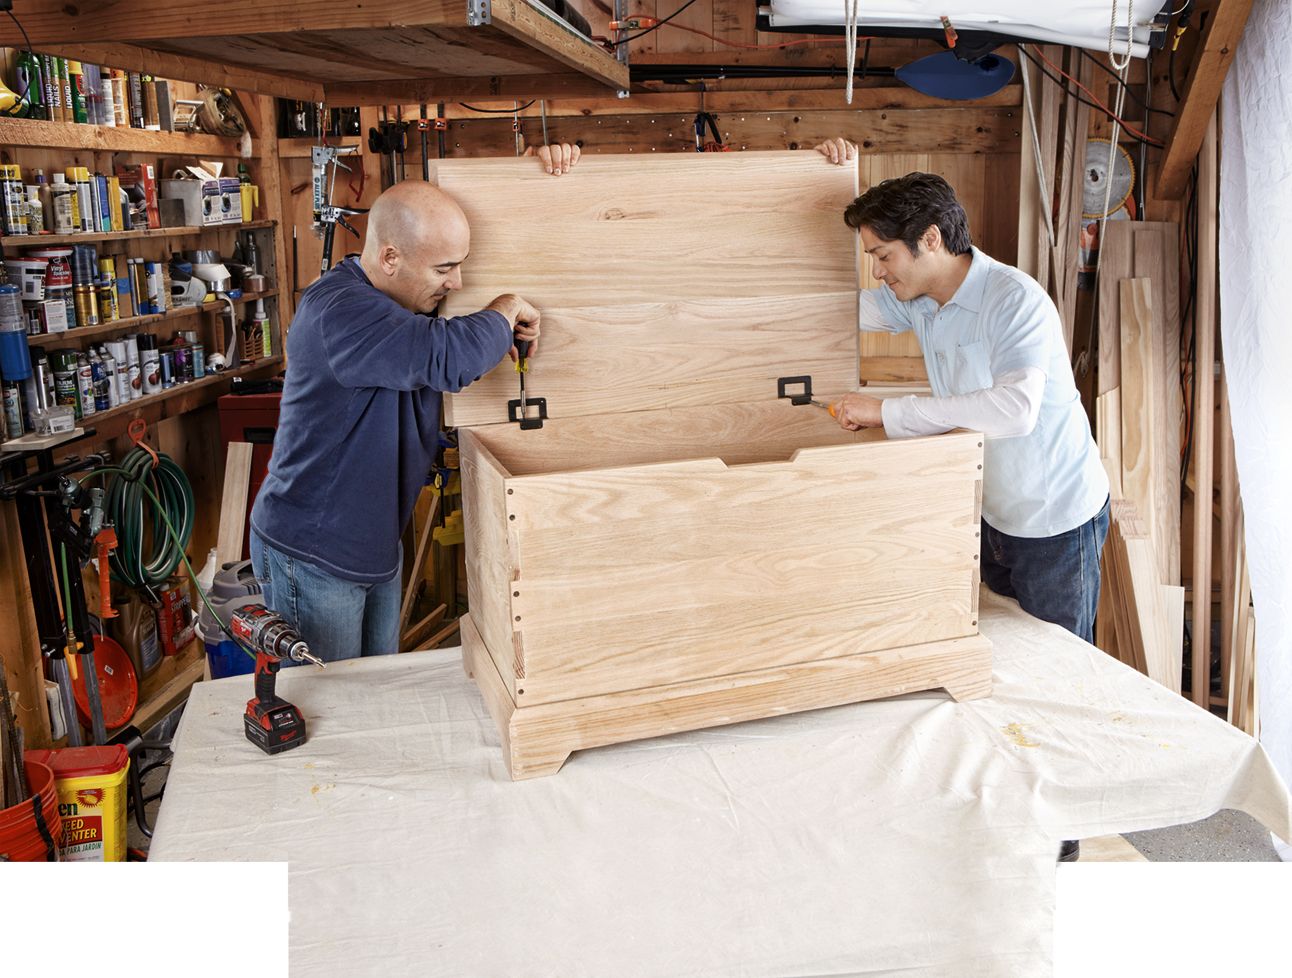 💡How to make wooden storage chest🤯 